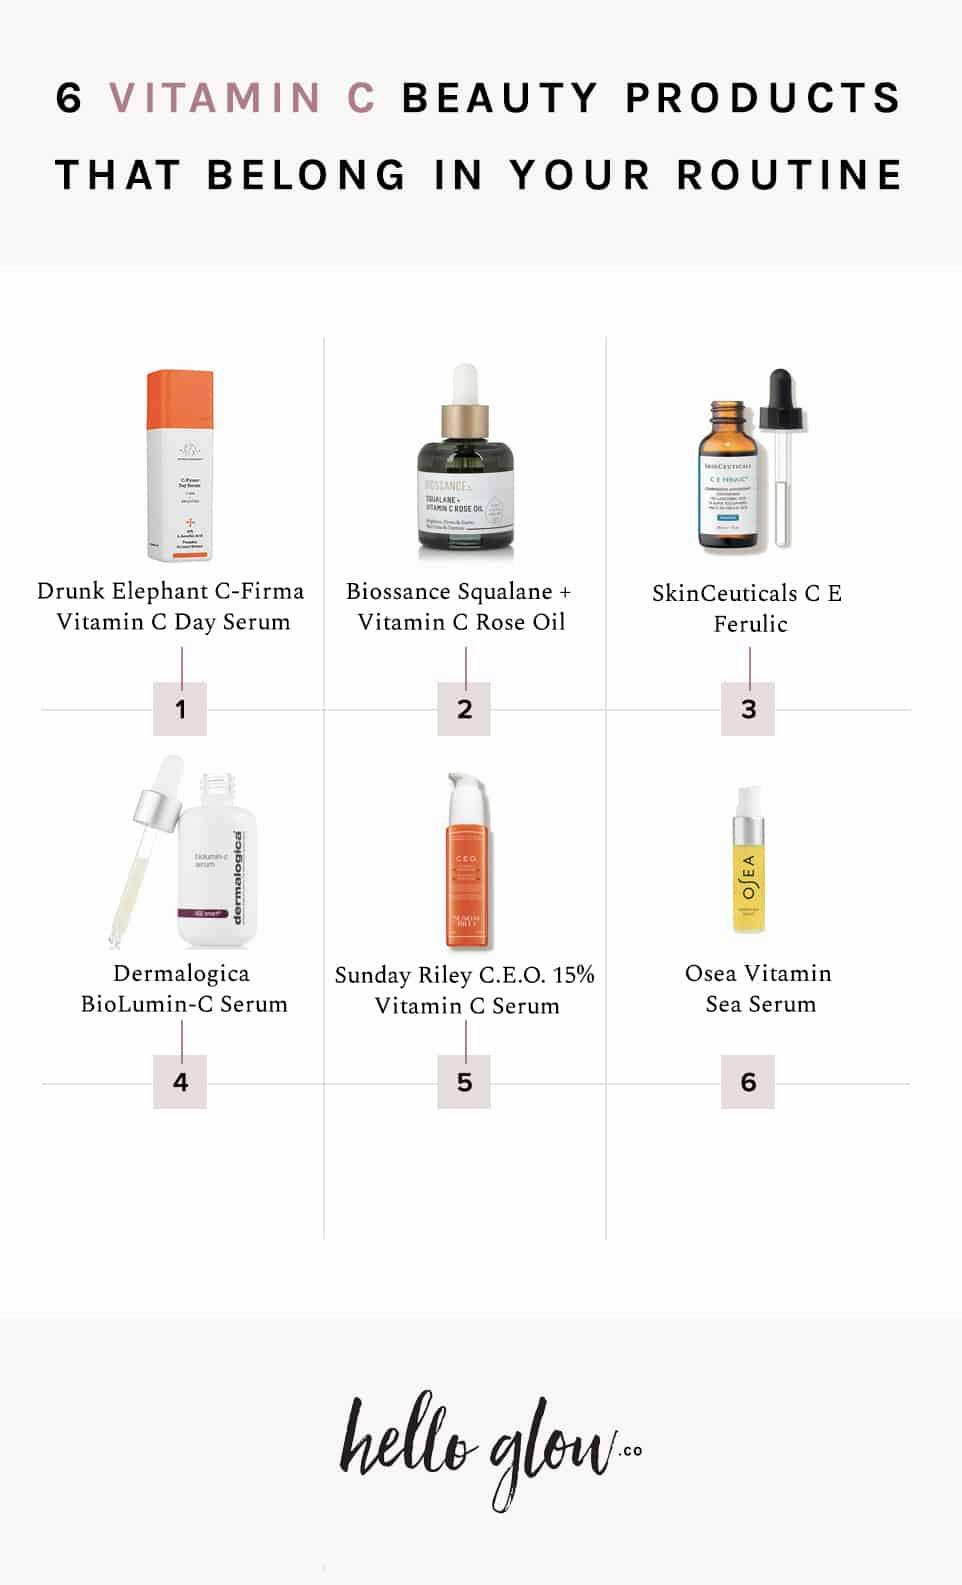 A lineup of six different vitamin c beauty products.